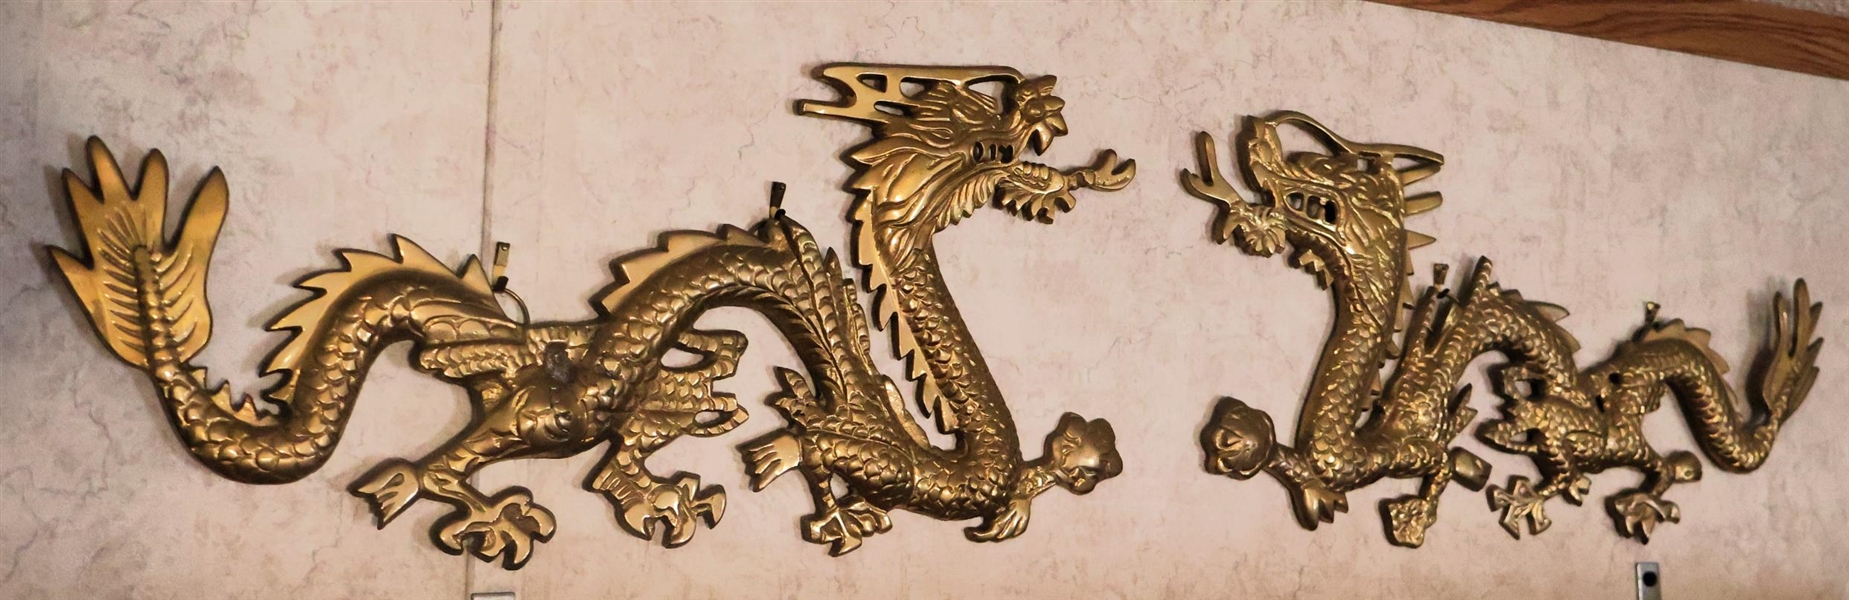 Pair of Brass Dragon Wall Plaques - Measuring Approx. 16" Each 